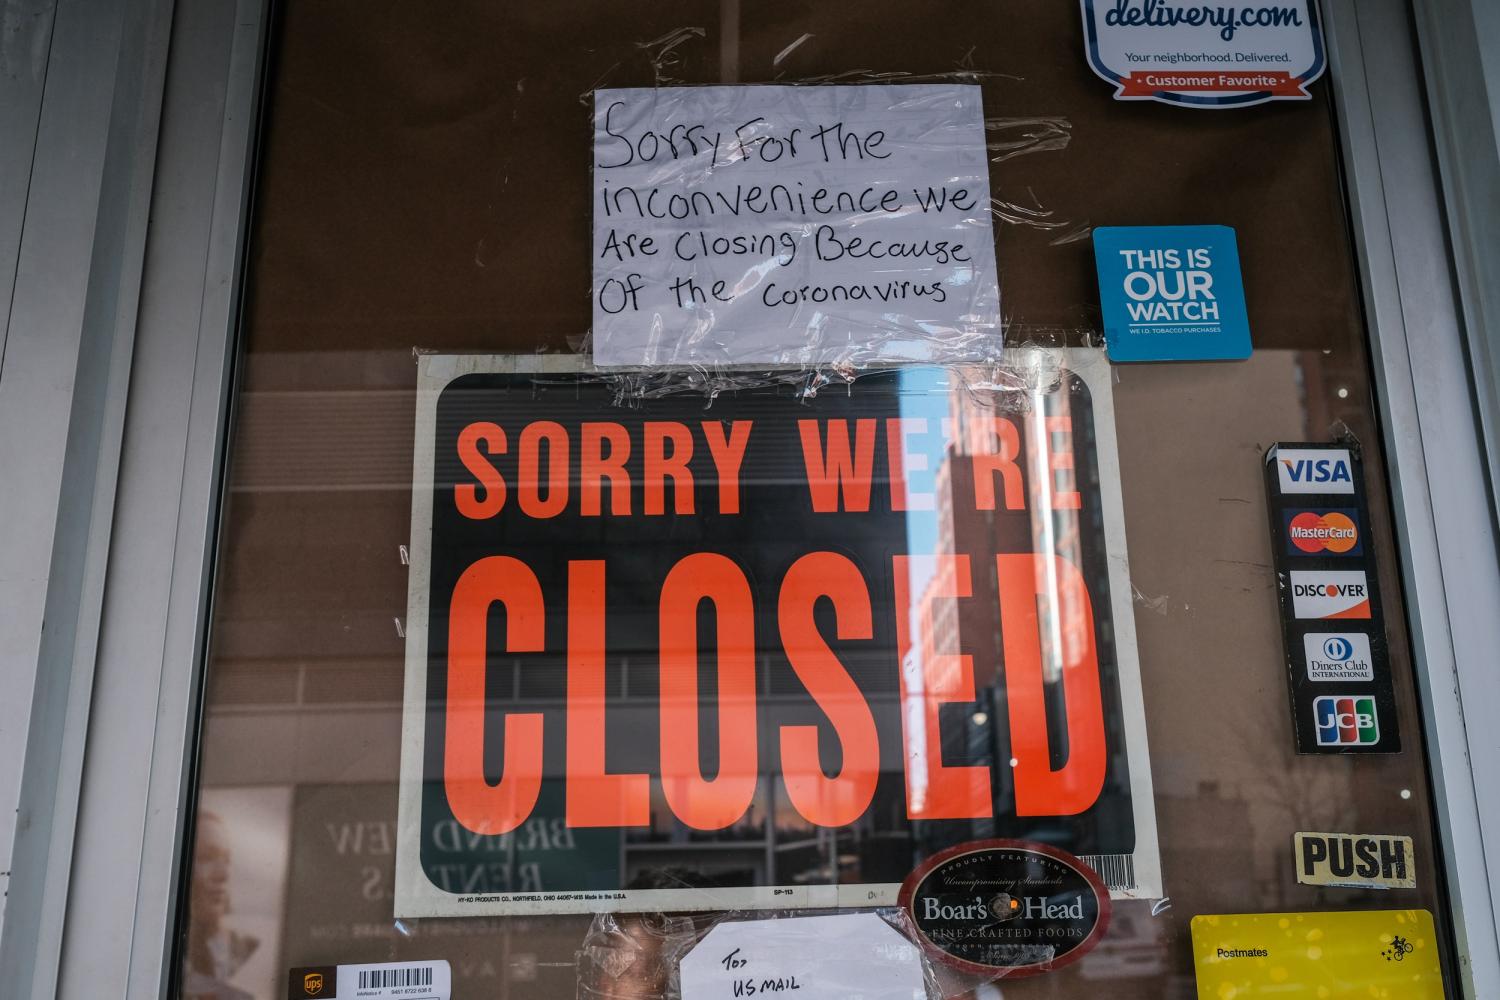 FILE PHOTO: A deli is seen closed, due to the outbreak of the coronavirus disease (COVID-19) in the Brooklyn borough of New York City, U.S., March 26, 2020. REUTERS/Stephen Yang/File Photo